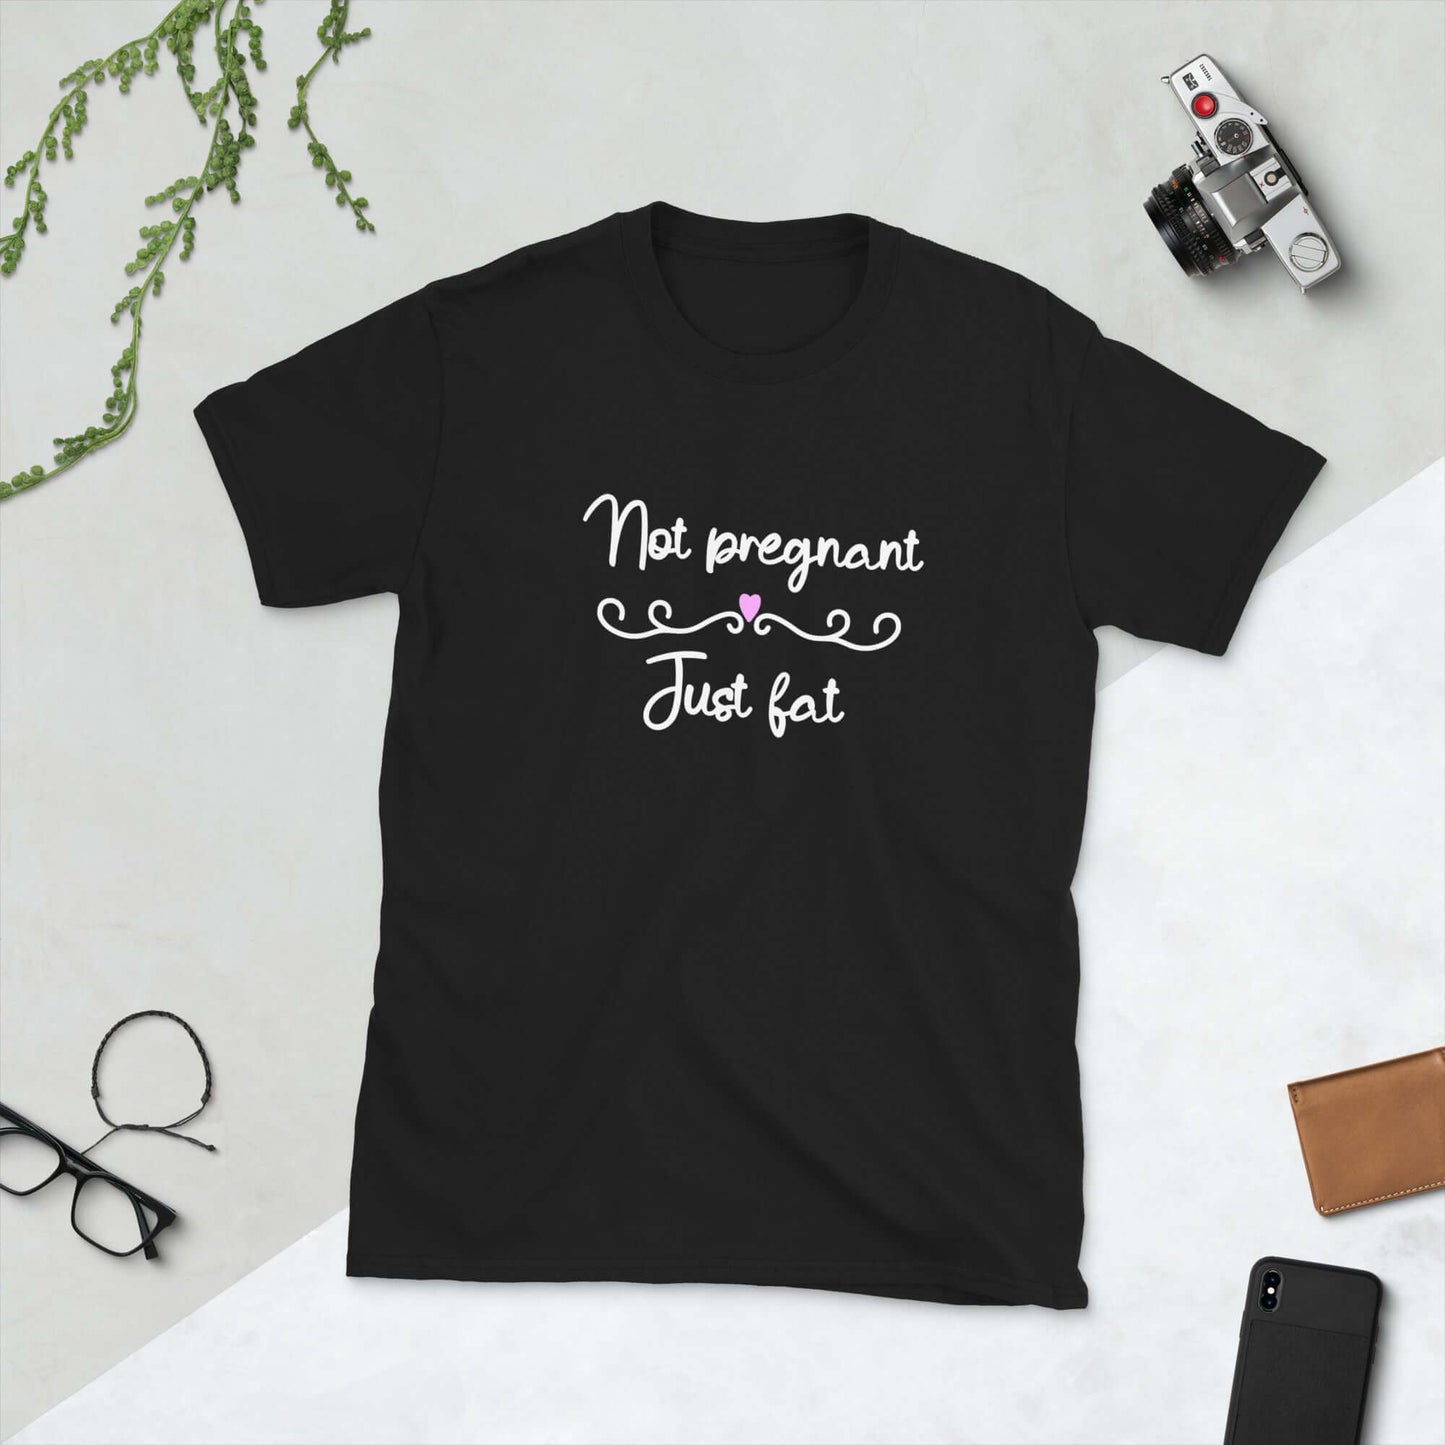 Black t-shirt with the words Not pregnant just fat printed on the front with a heart.